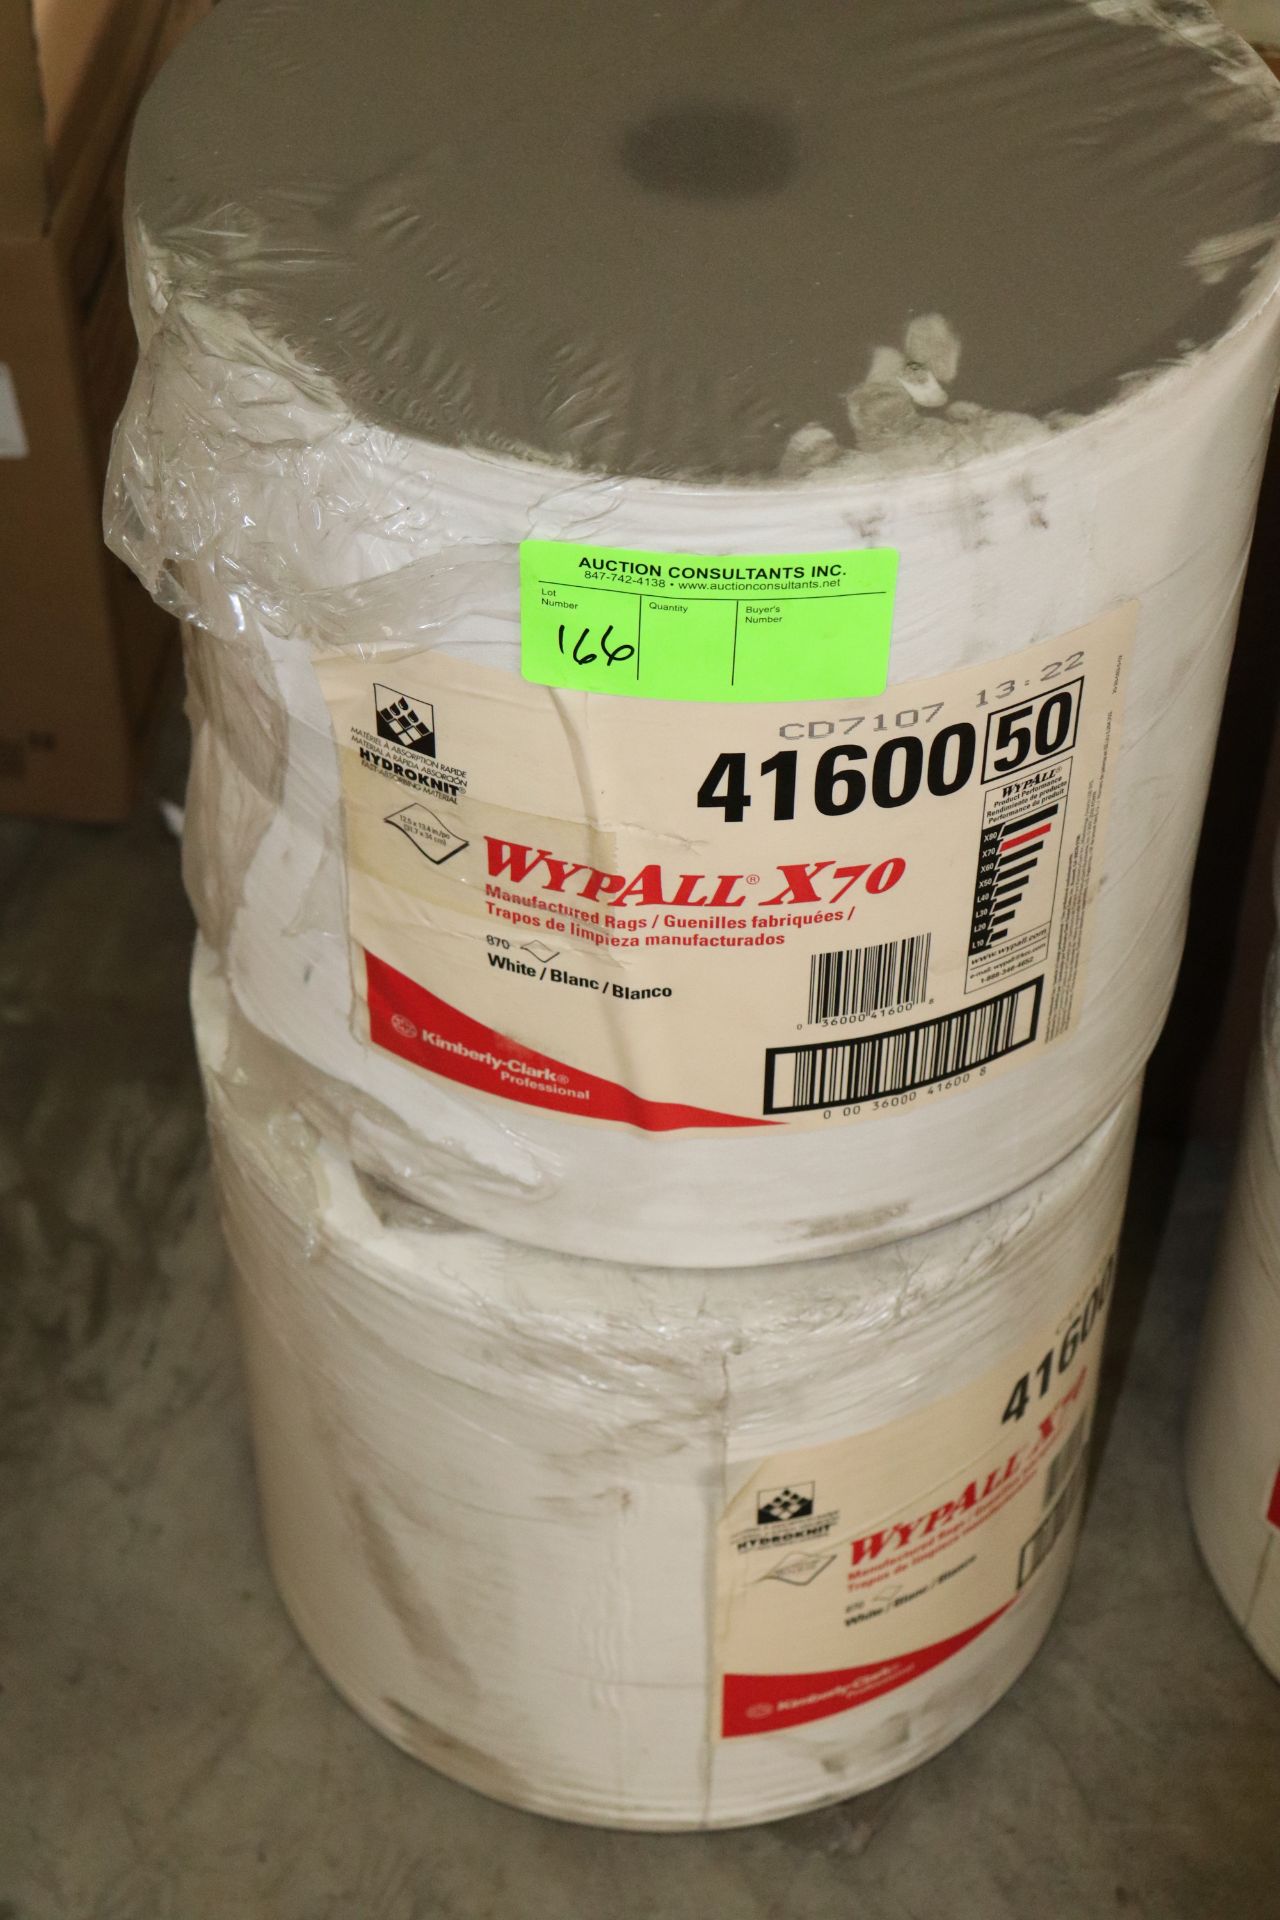 Two rolls of Wypall X70 manufactured rags